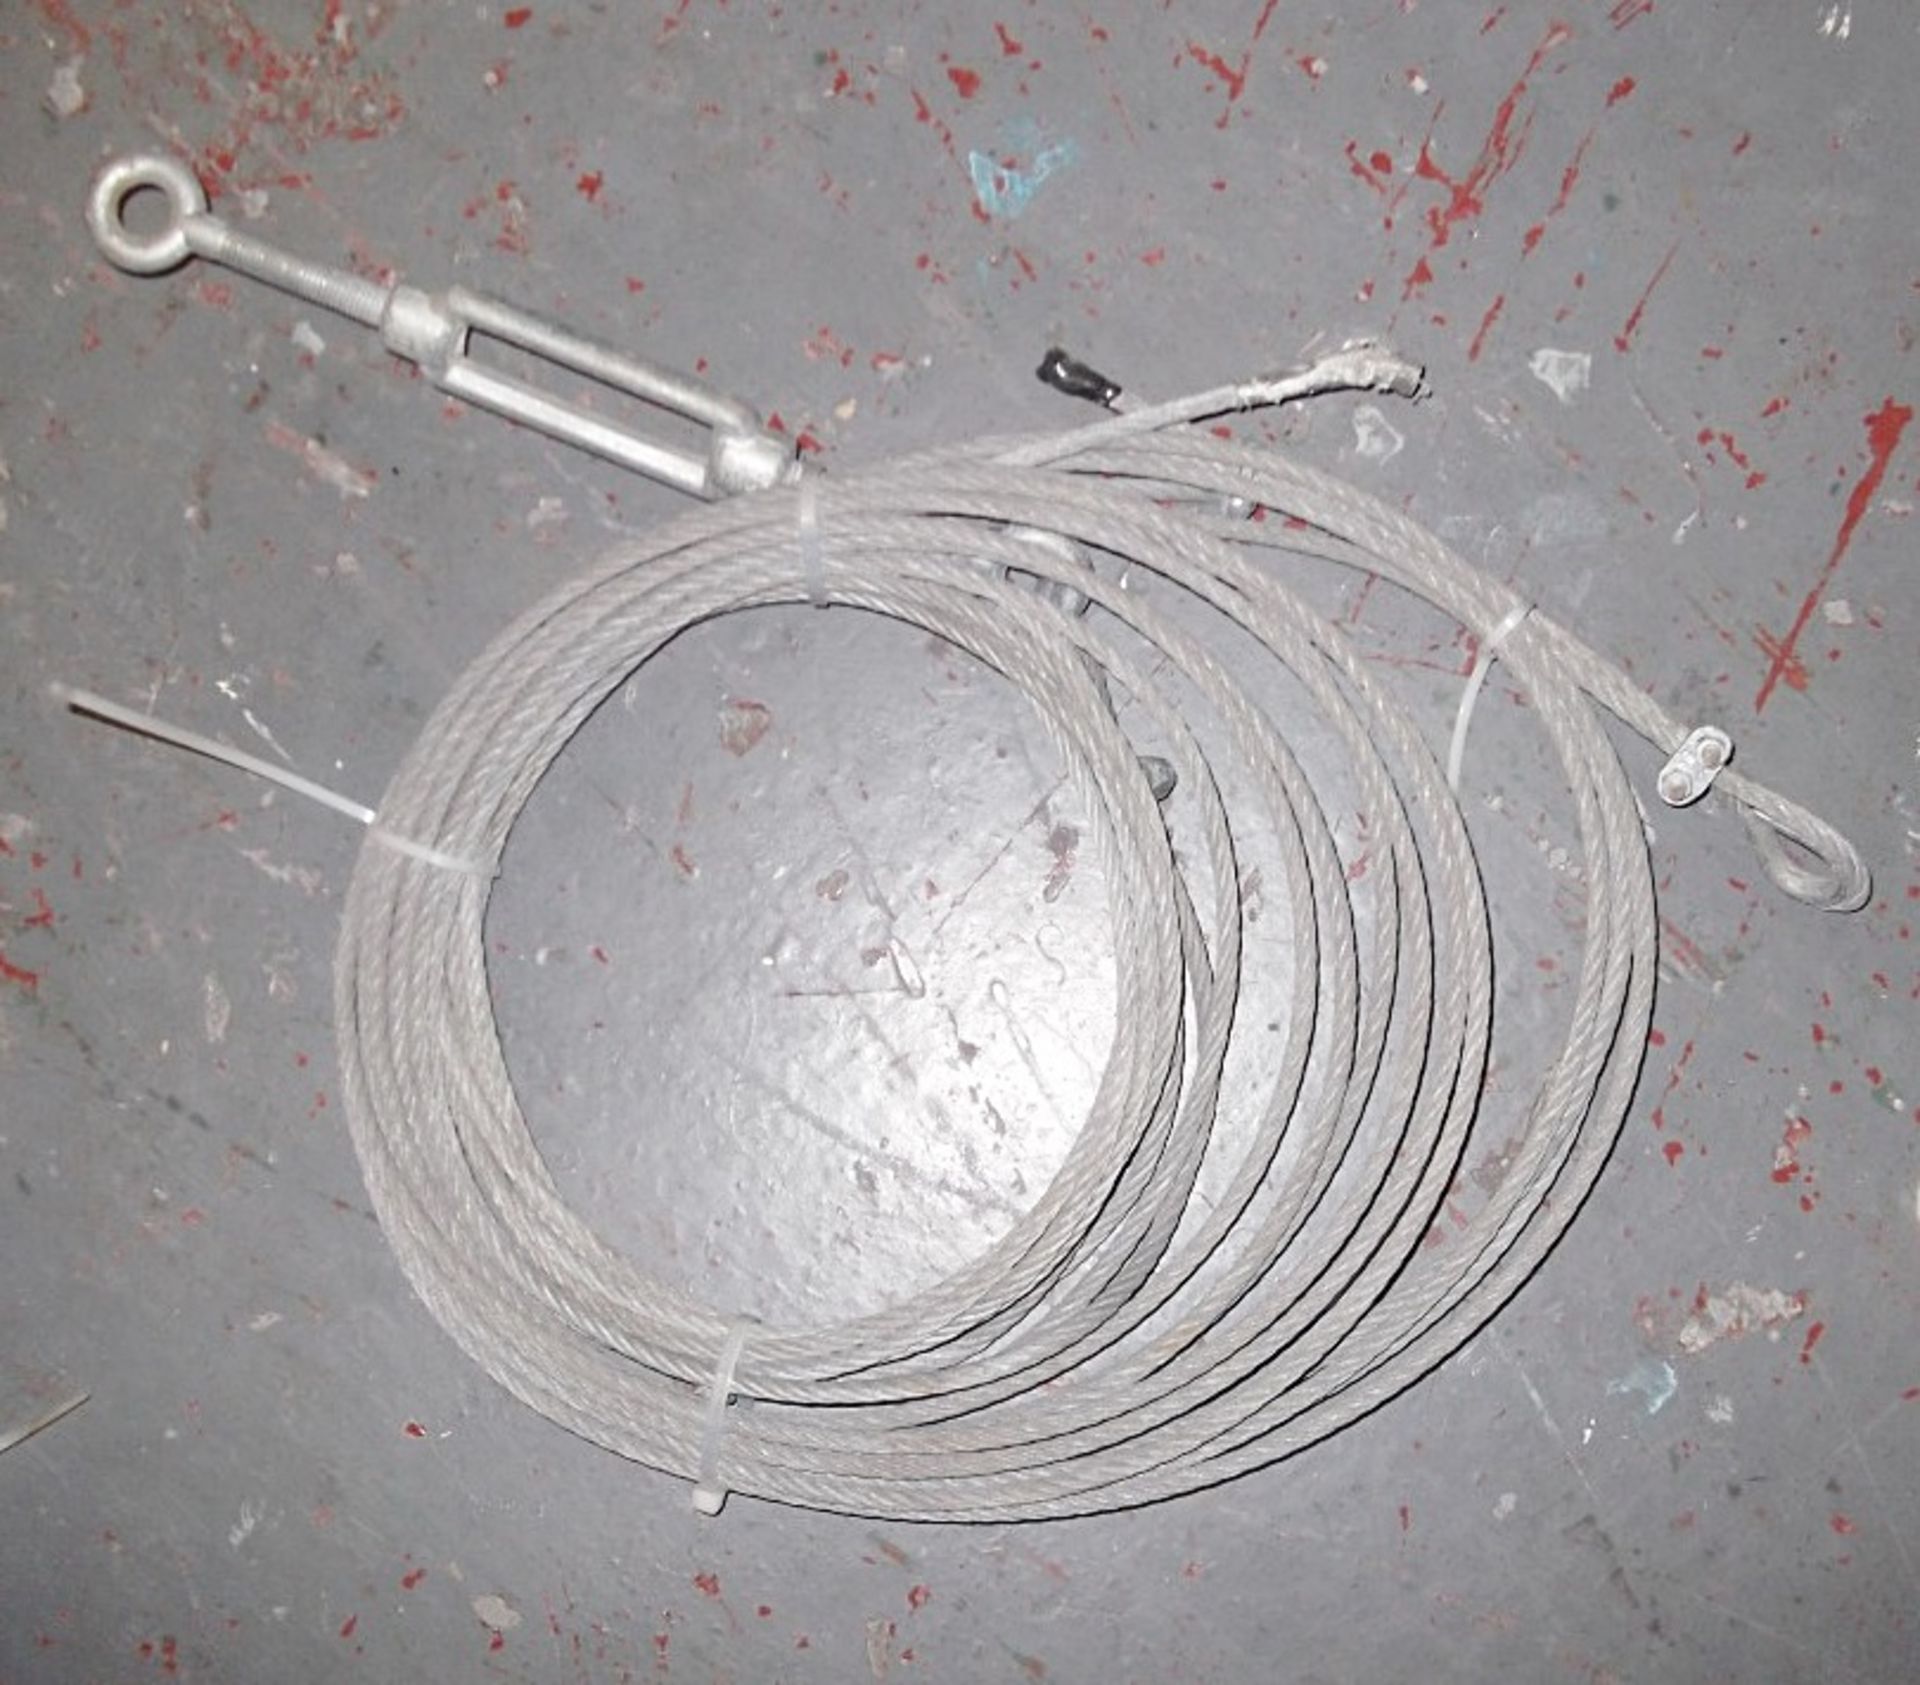 9 x Assorted Coils Of Catenary Wire - Supplied In A Variety Of Thicknesses And Lengths, Most With - Image 2 of 5